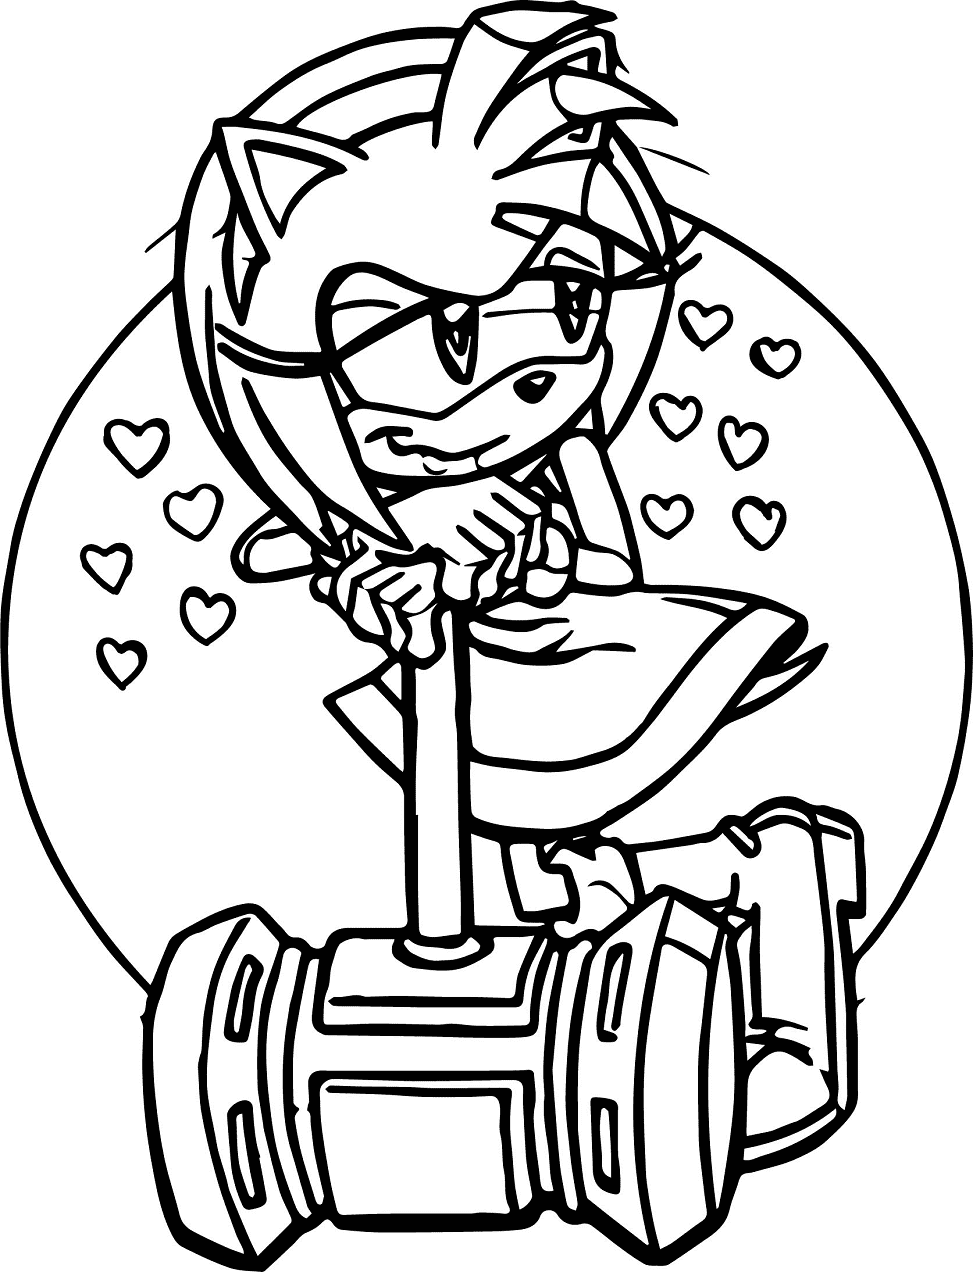 Amy Rose for Kids Coloring Page